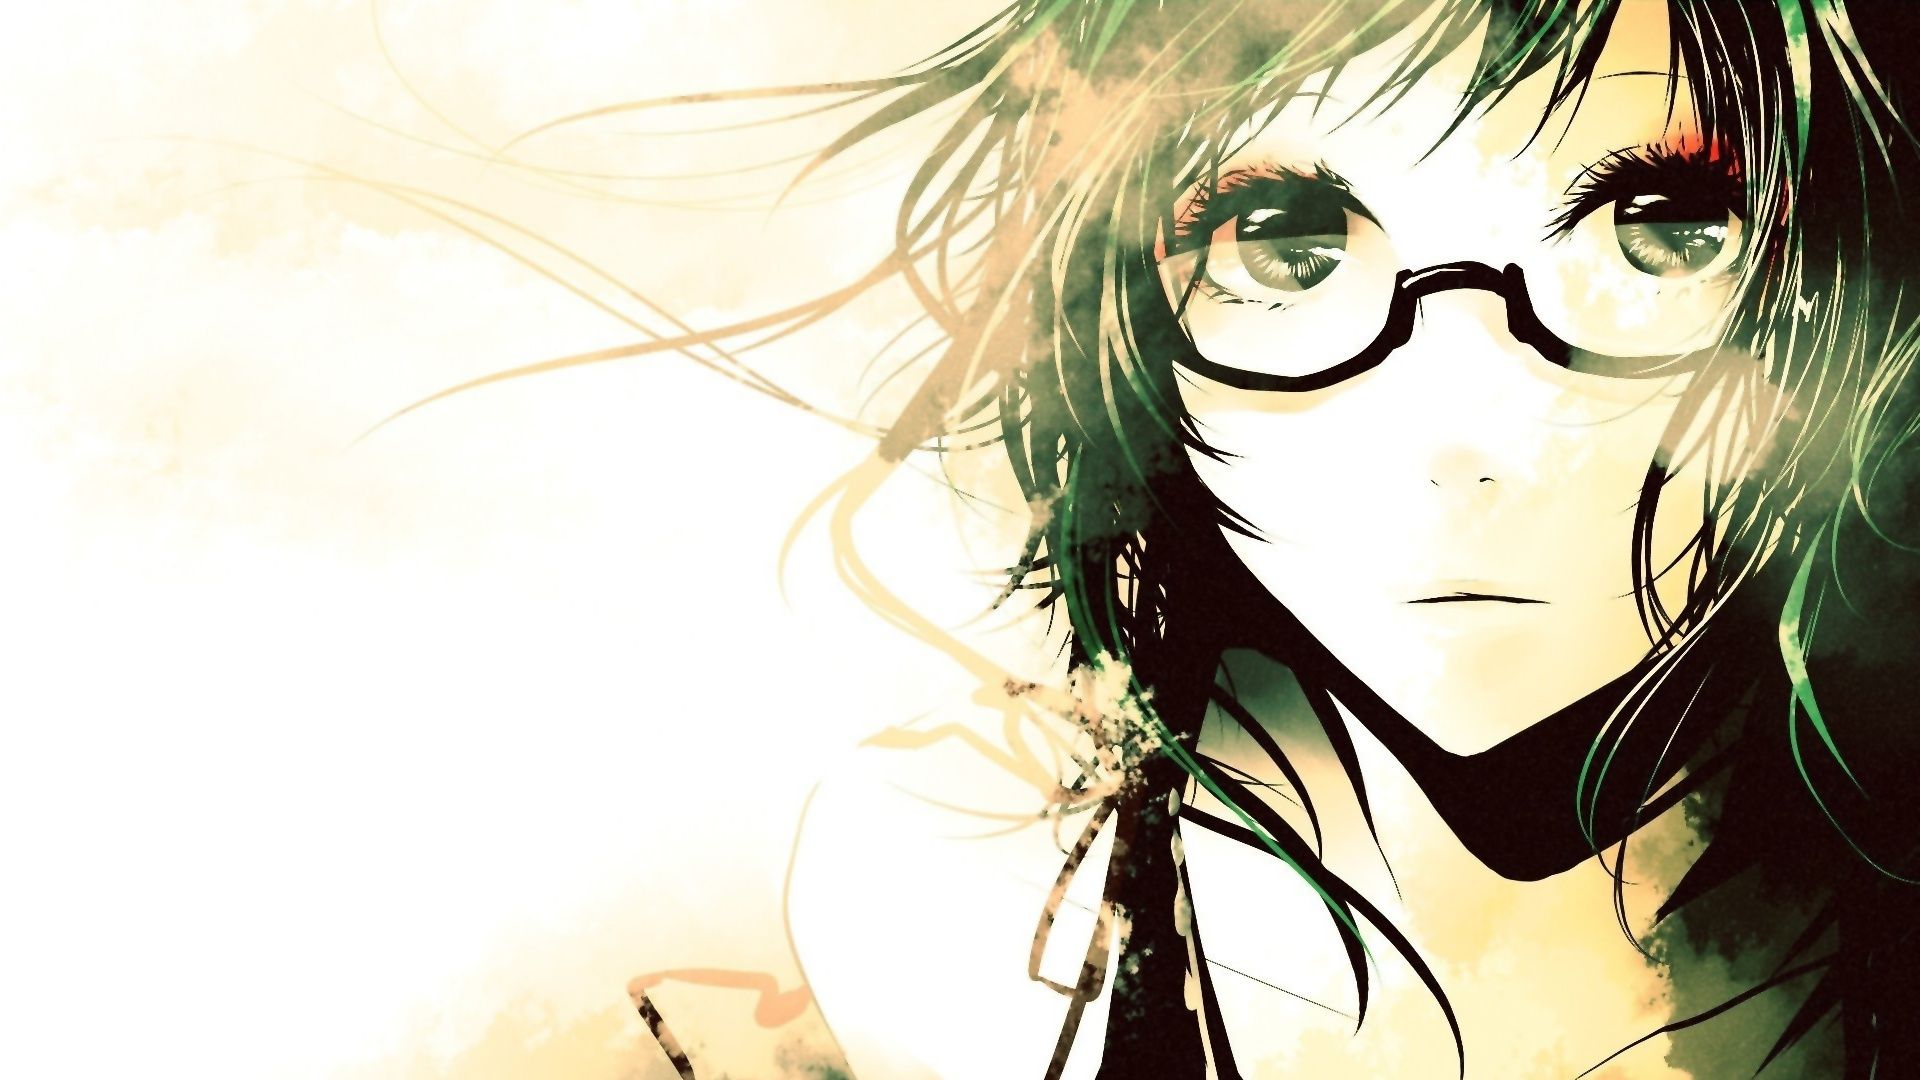 Free download Anime Music Wallpaper The Art Mad Wallpaper